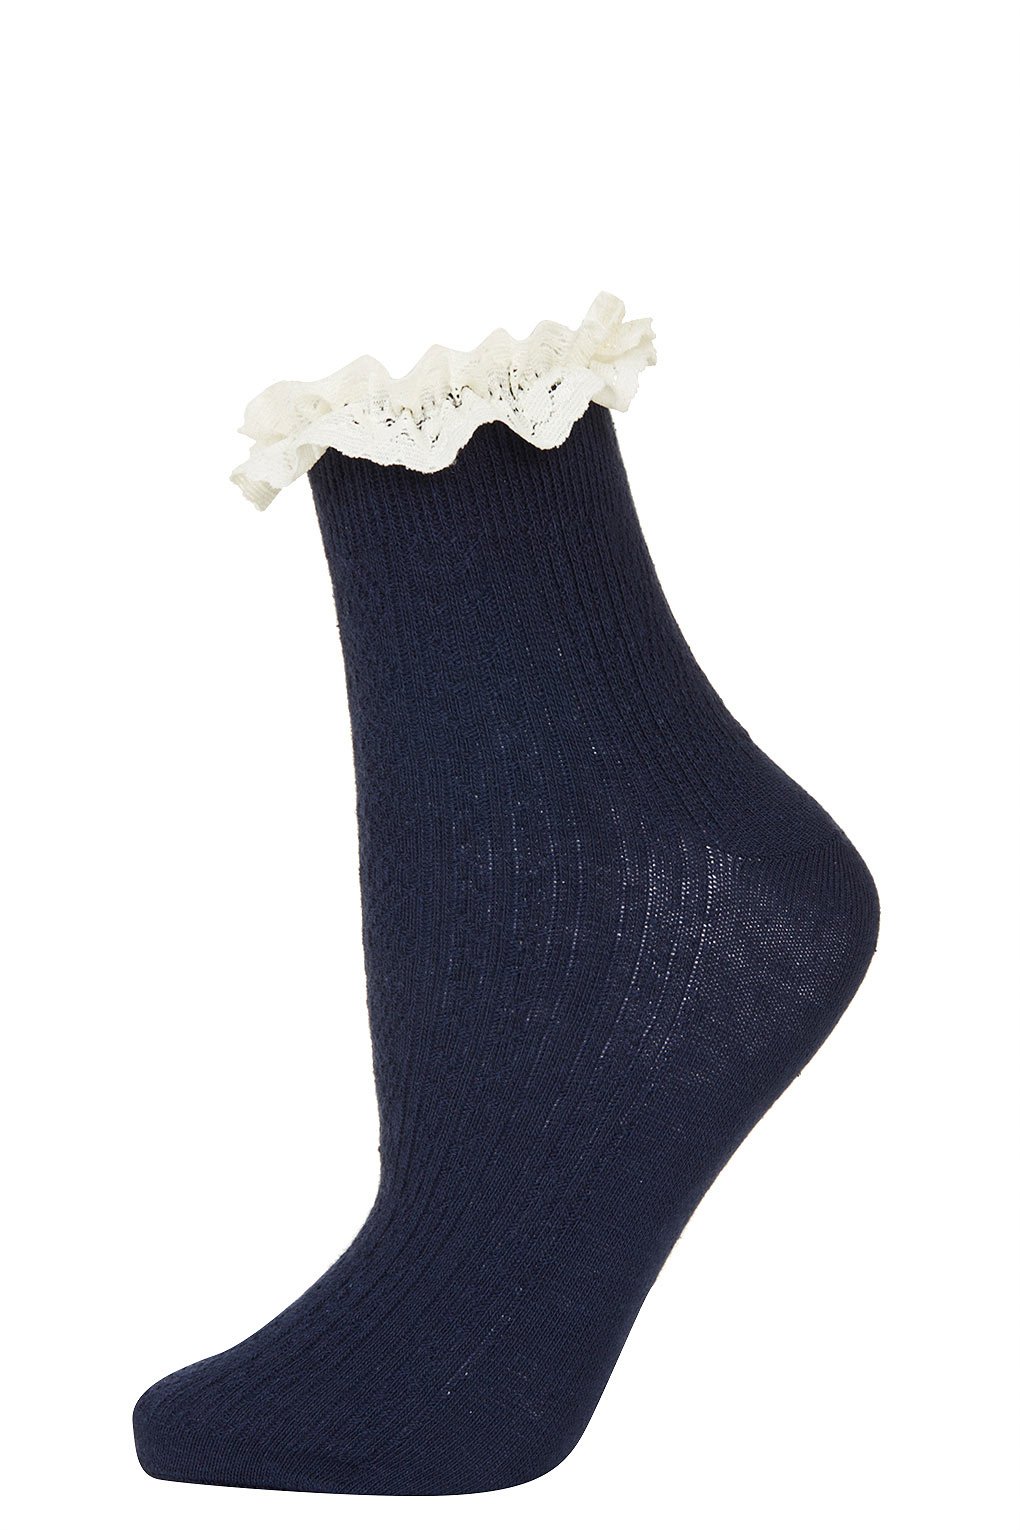 Topshop Navy Lace Trim Ankle Socks in Blue | Lyst